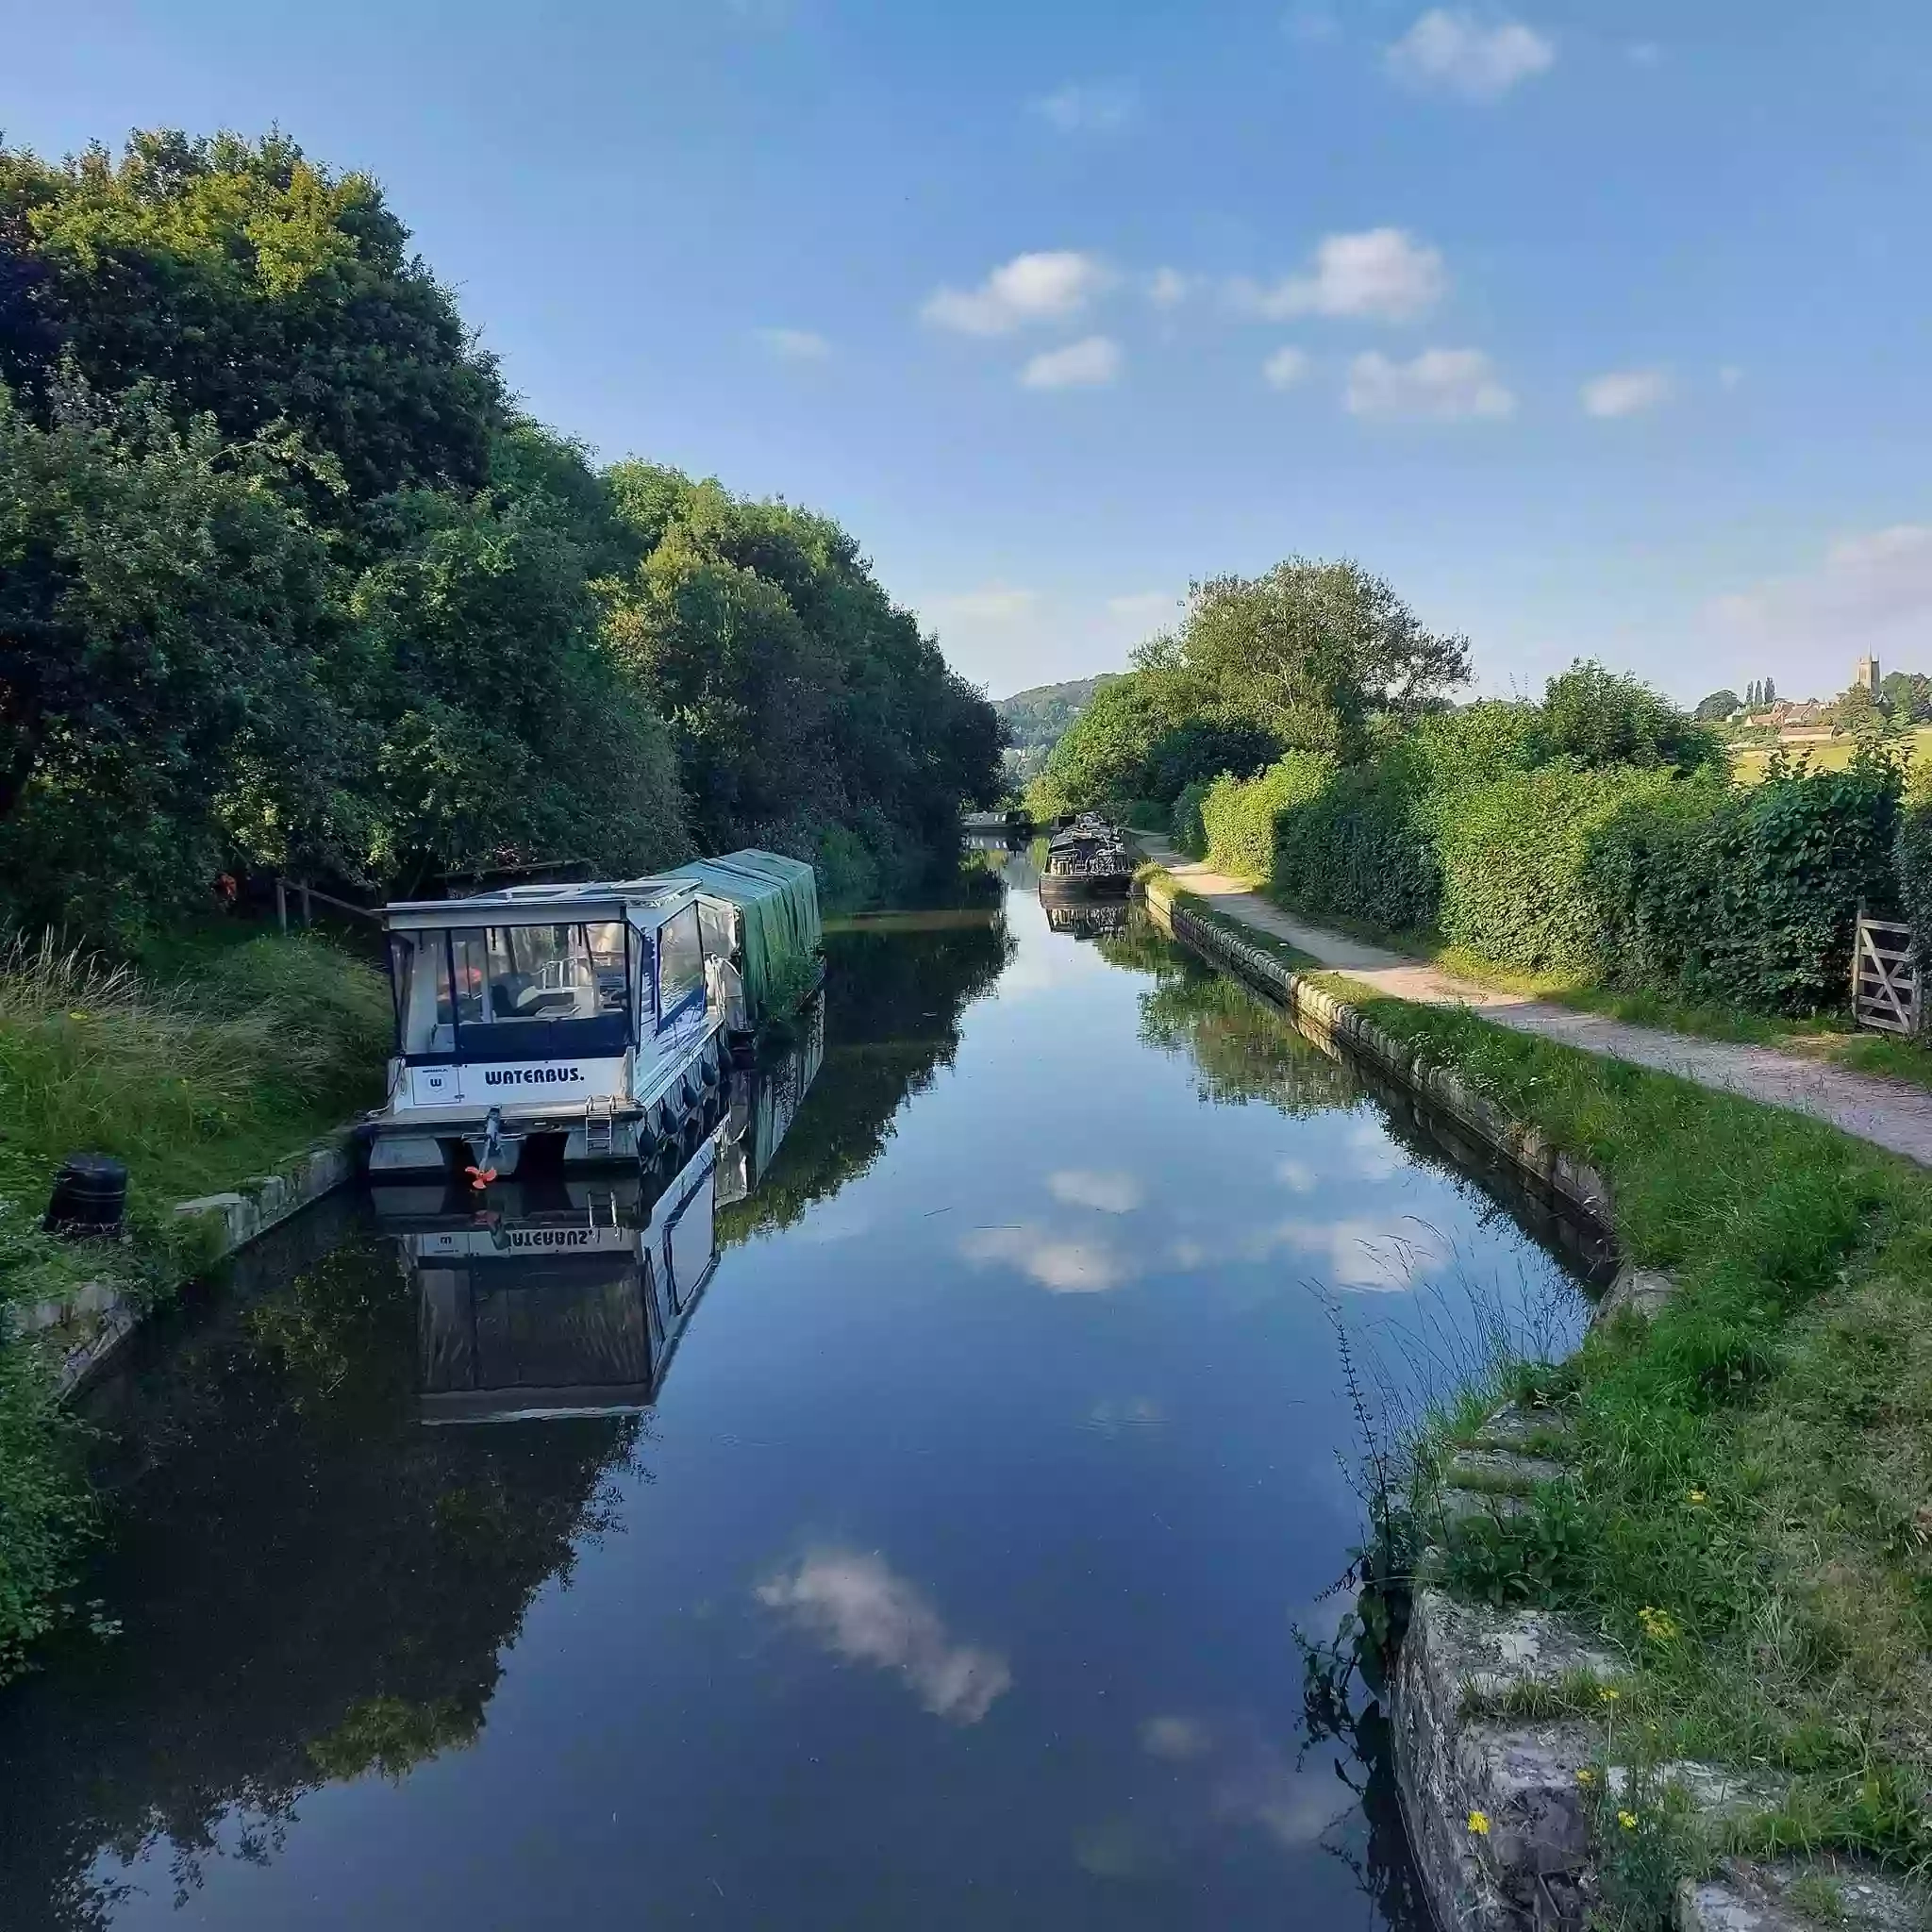 The Sir John Knill Boat Trips